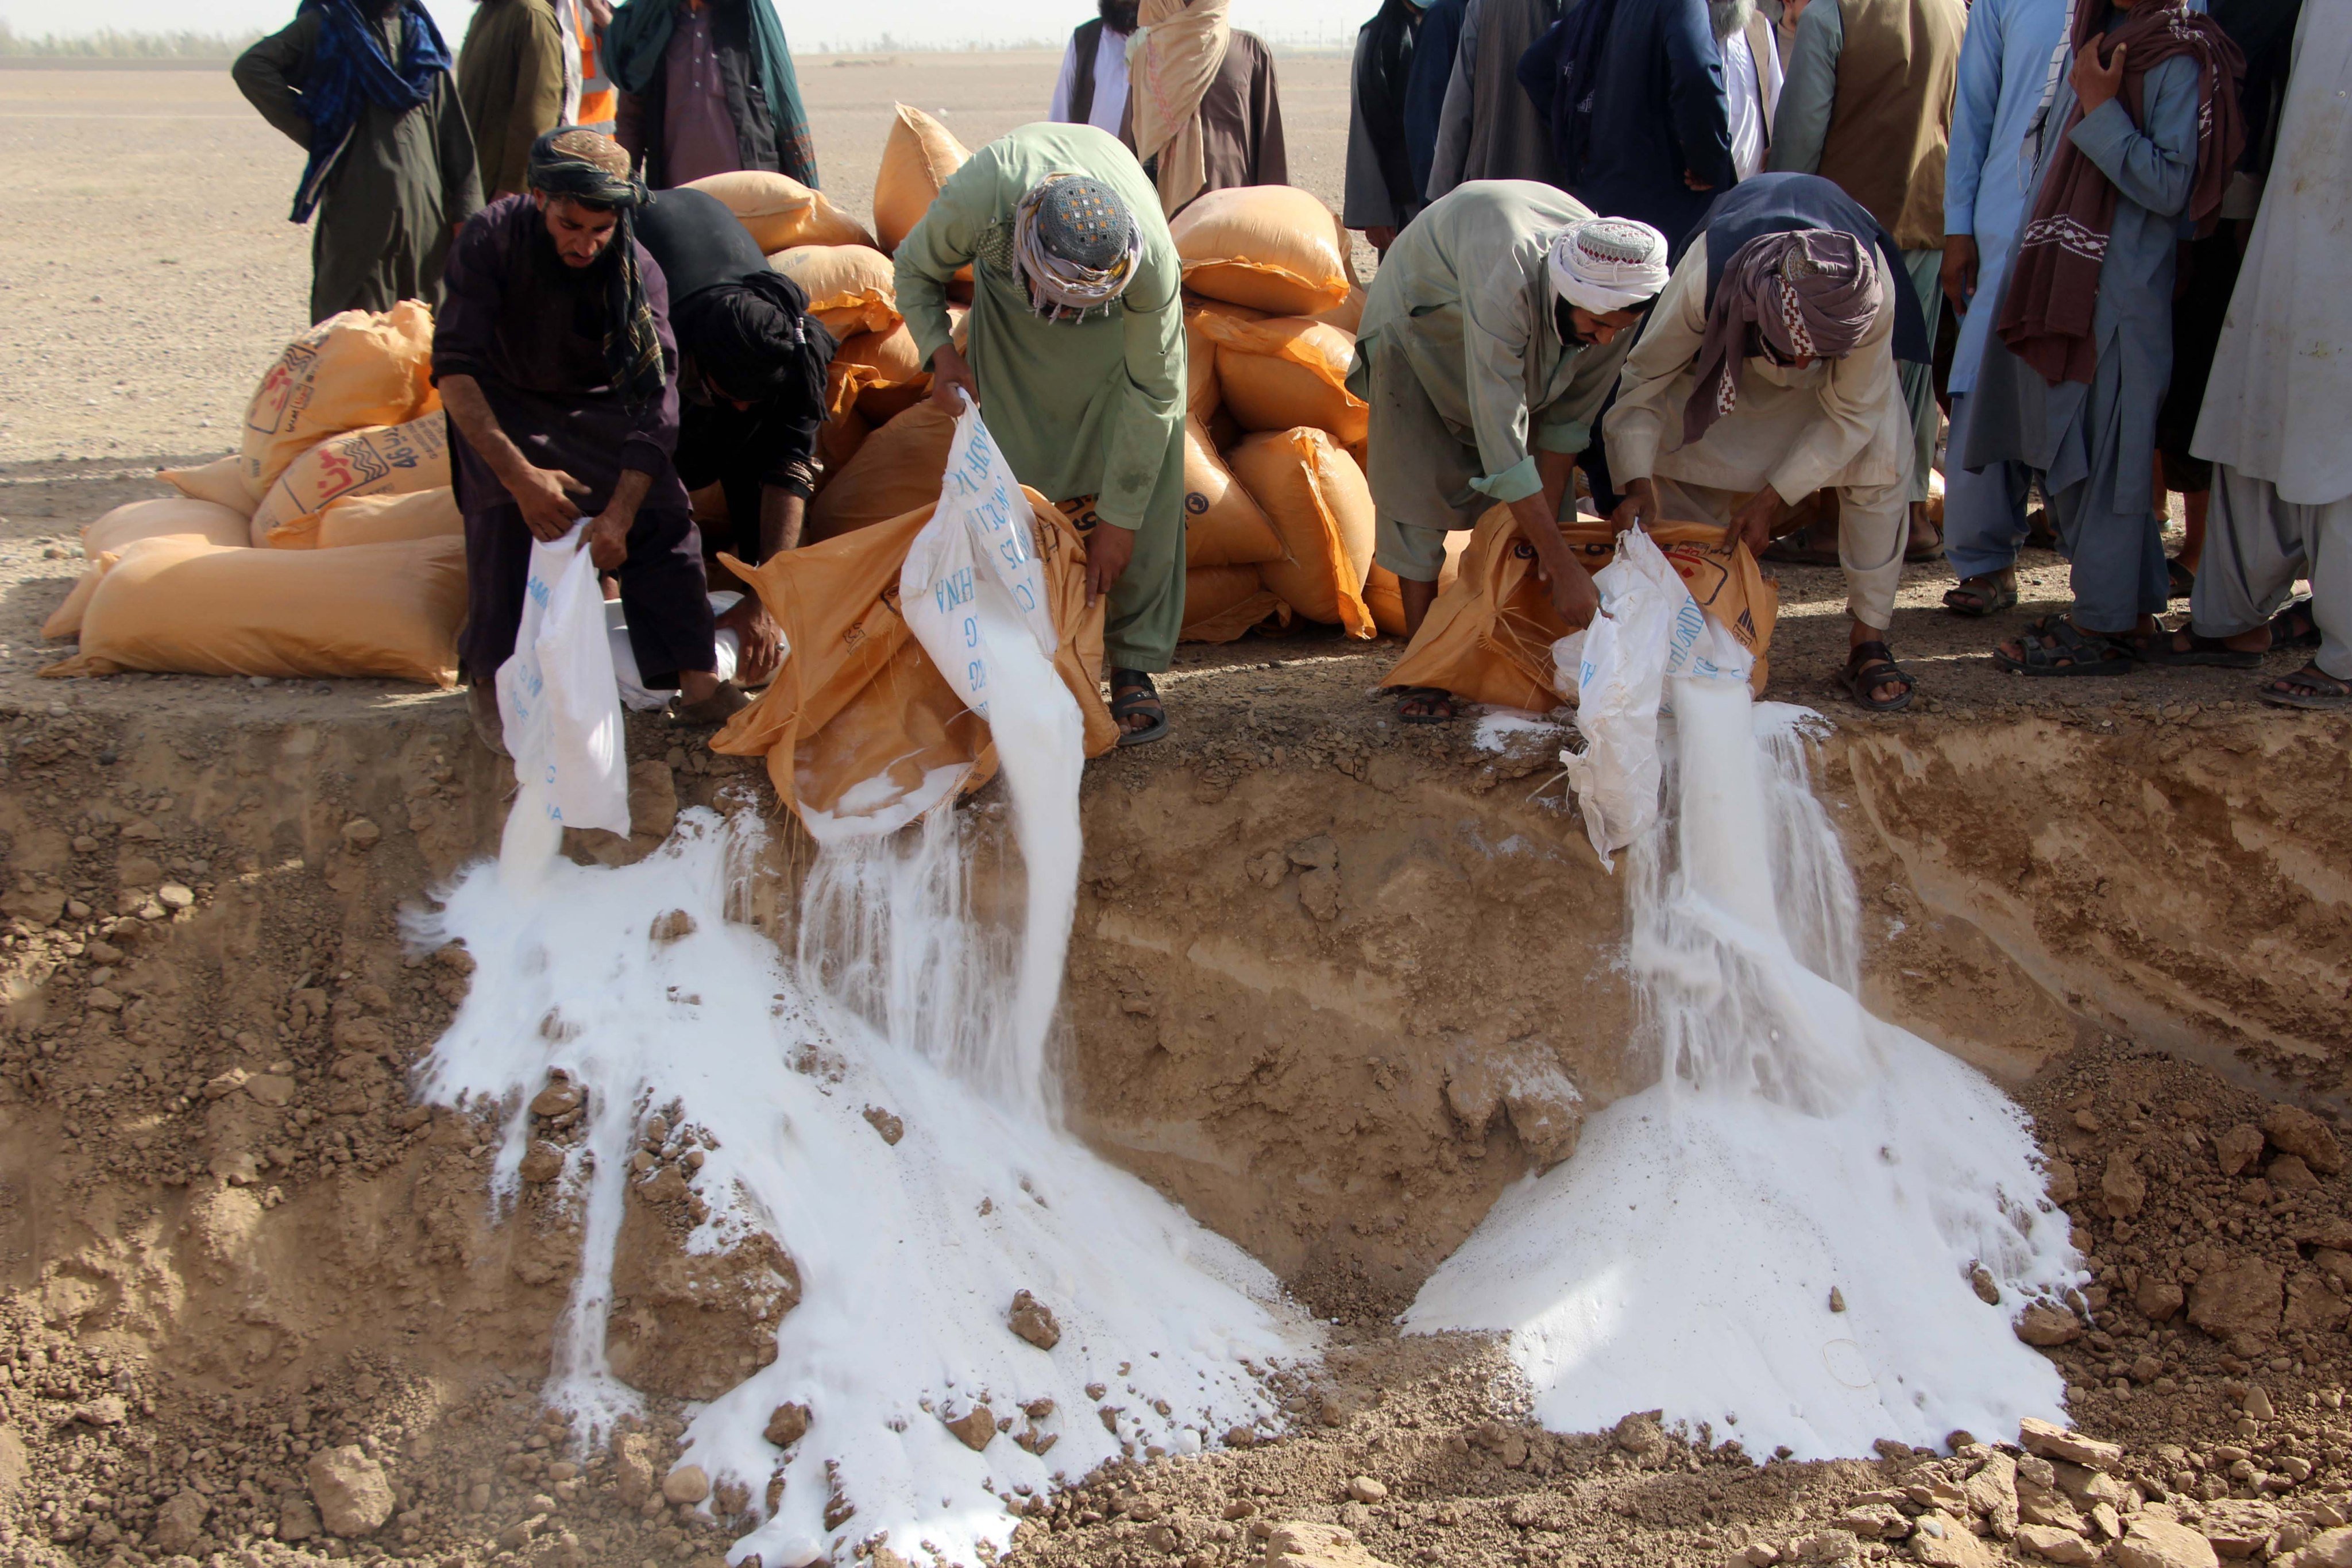 Afghan officials destroy narcotics and other illegal substances during a ceremony in Kandahar, Afghanistan. Photo: EPA-EFE